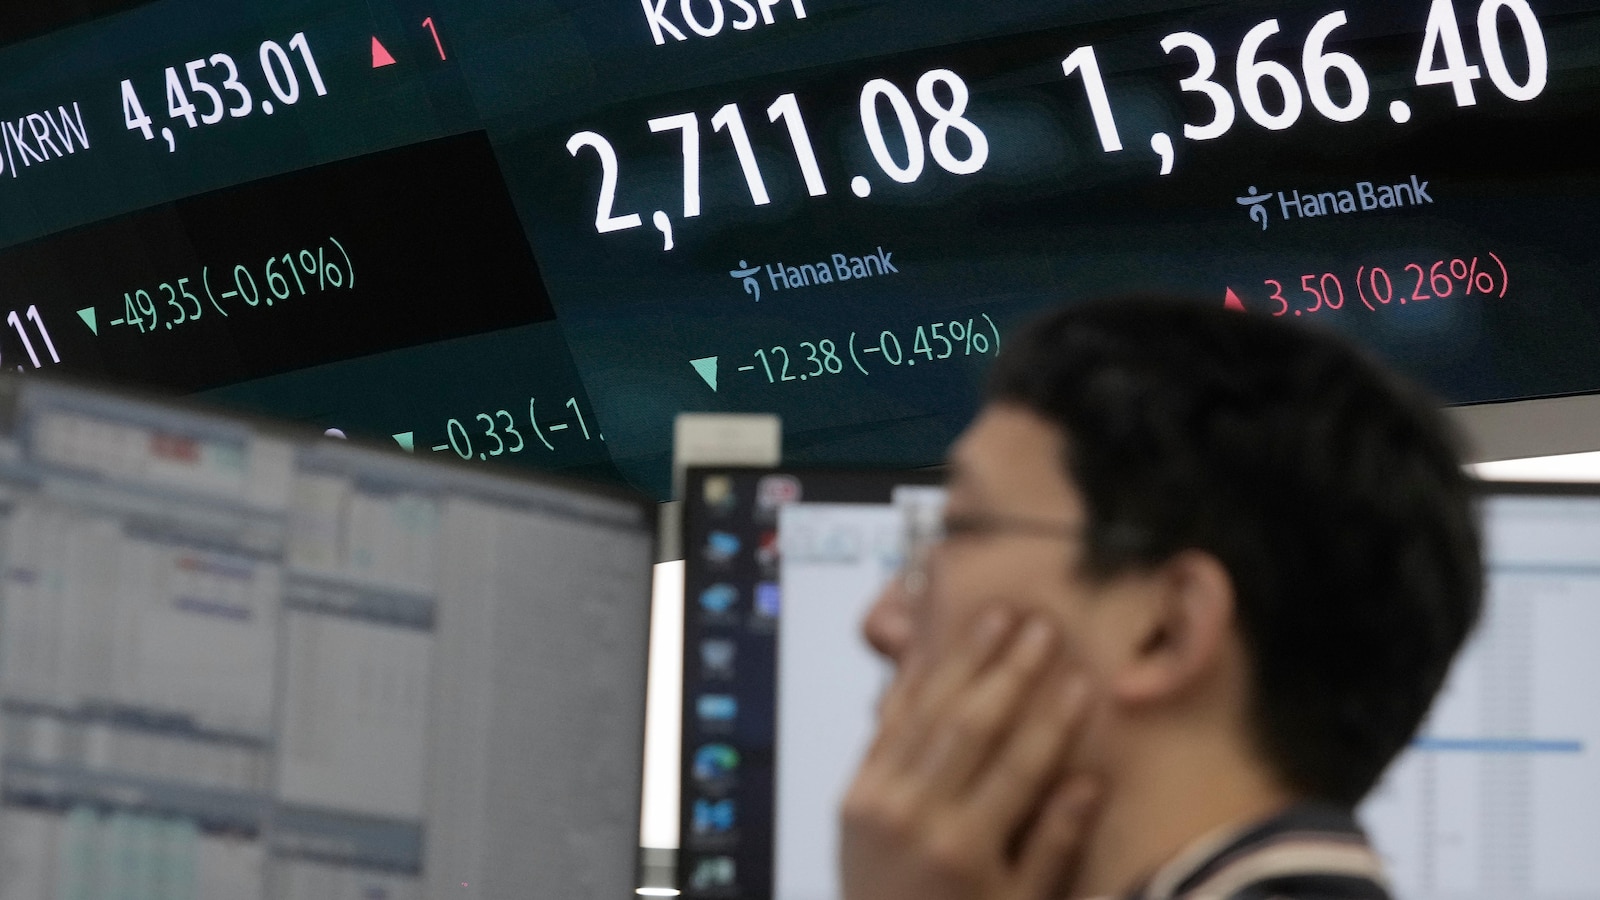 Stock market today: Asian stocks are mixed, while Chinese stocks fall after Wall Street pullback